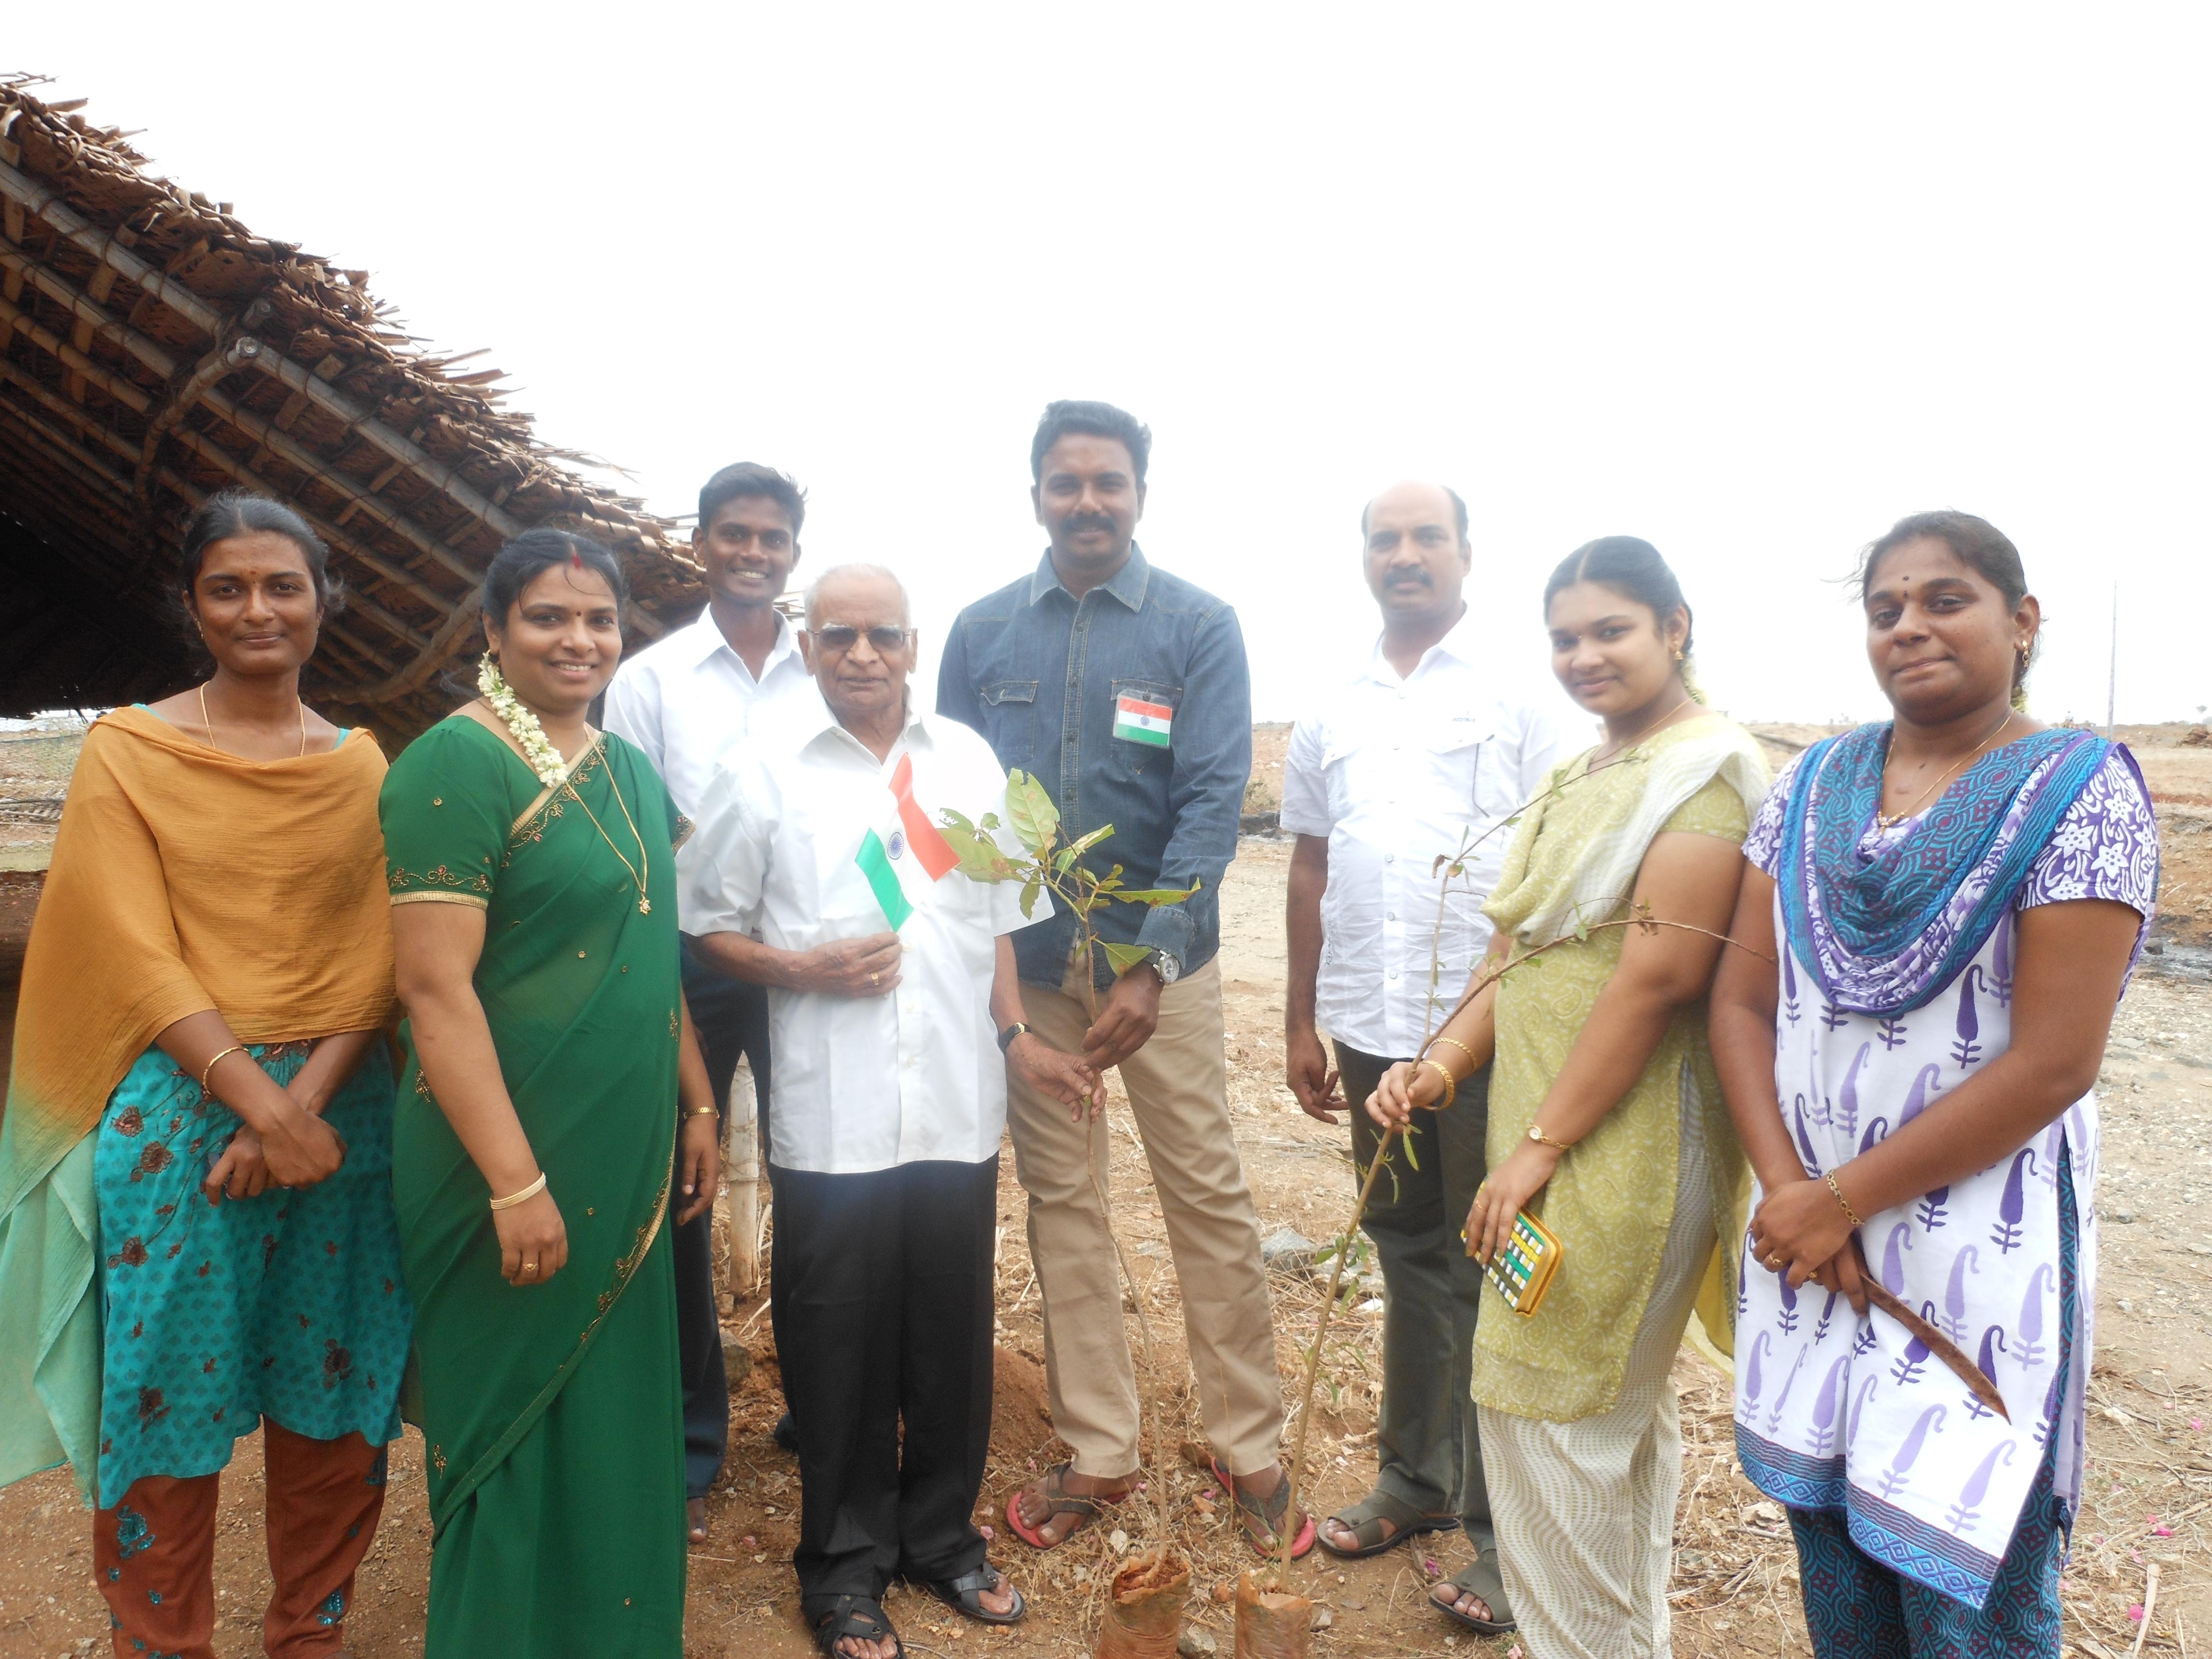 Independence Day Celebration with the students of Gowri’s English Academy